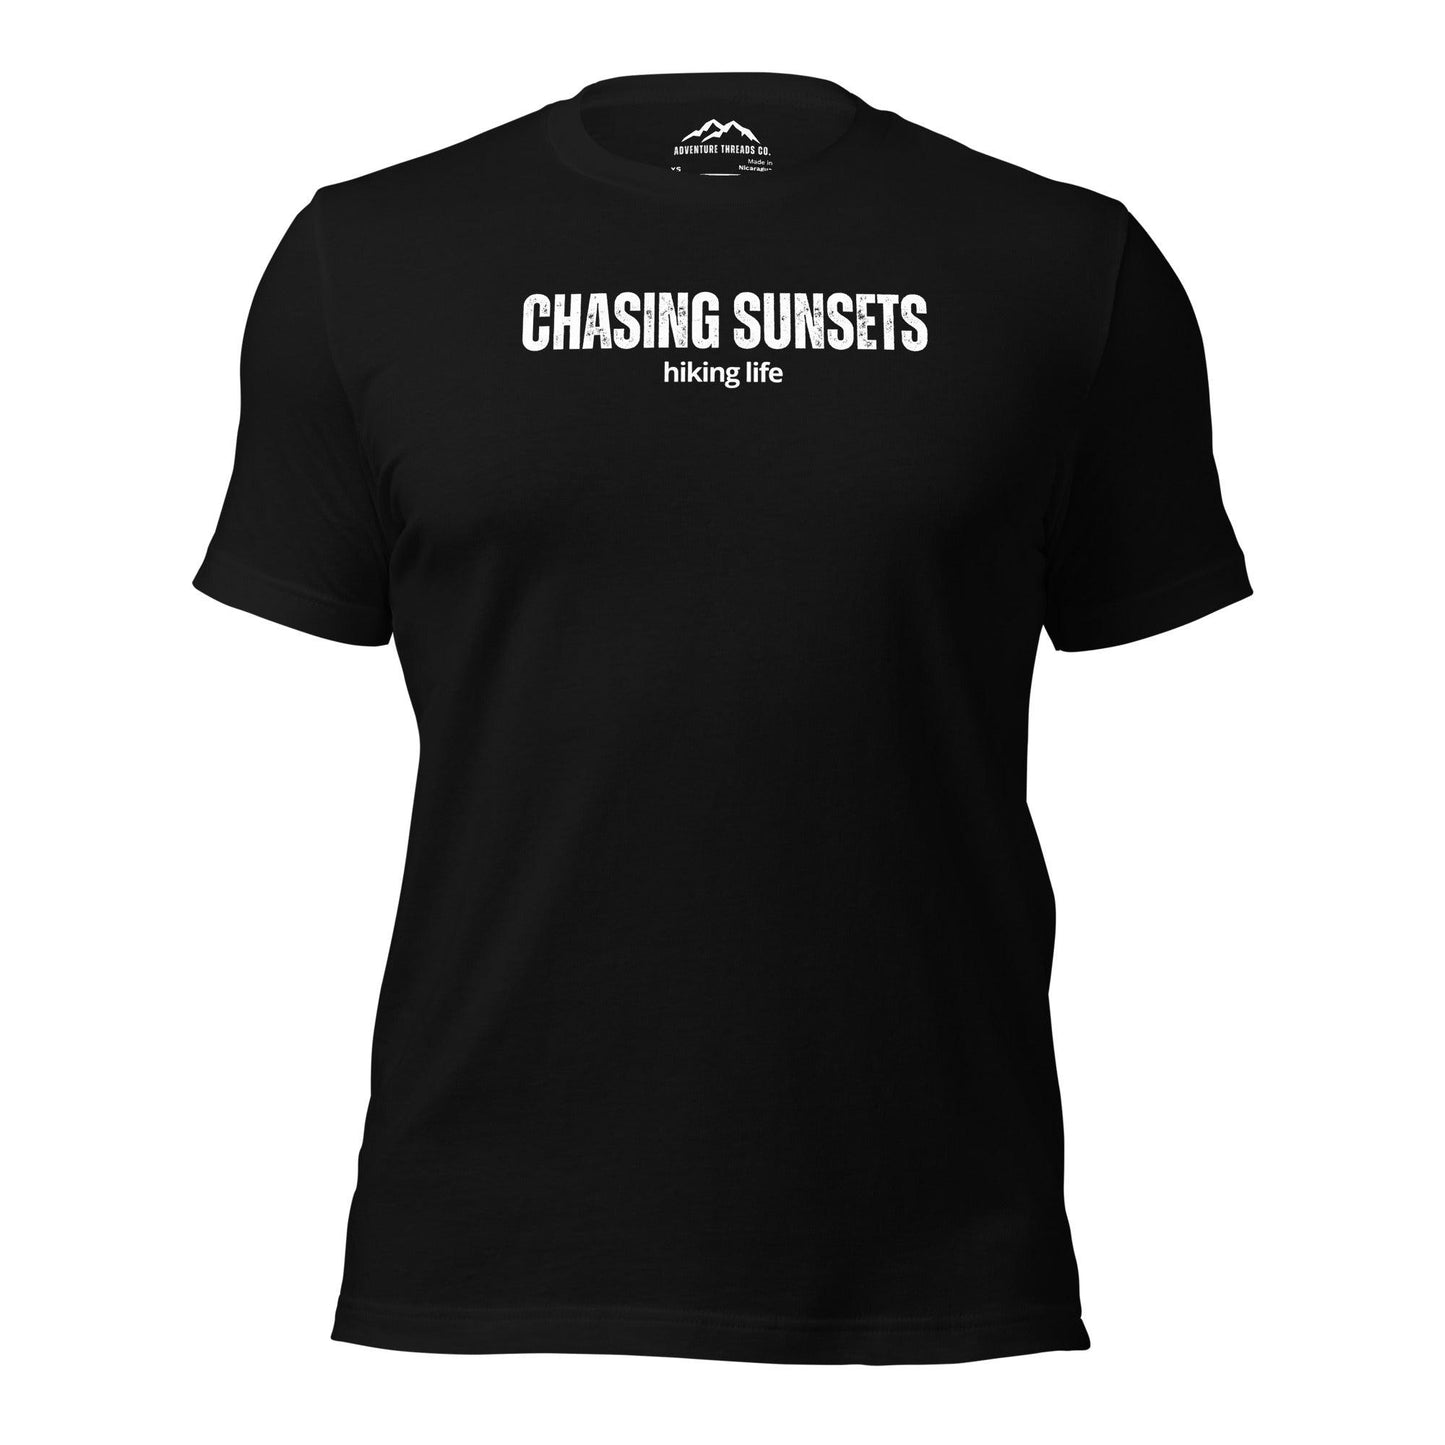 Chasing Sunsets T-Shirt - Adventure Threads Company